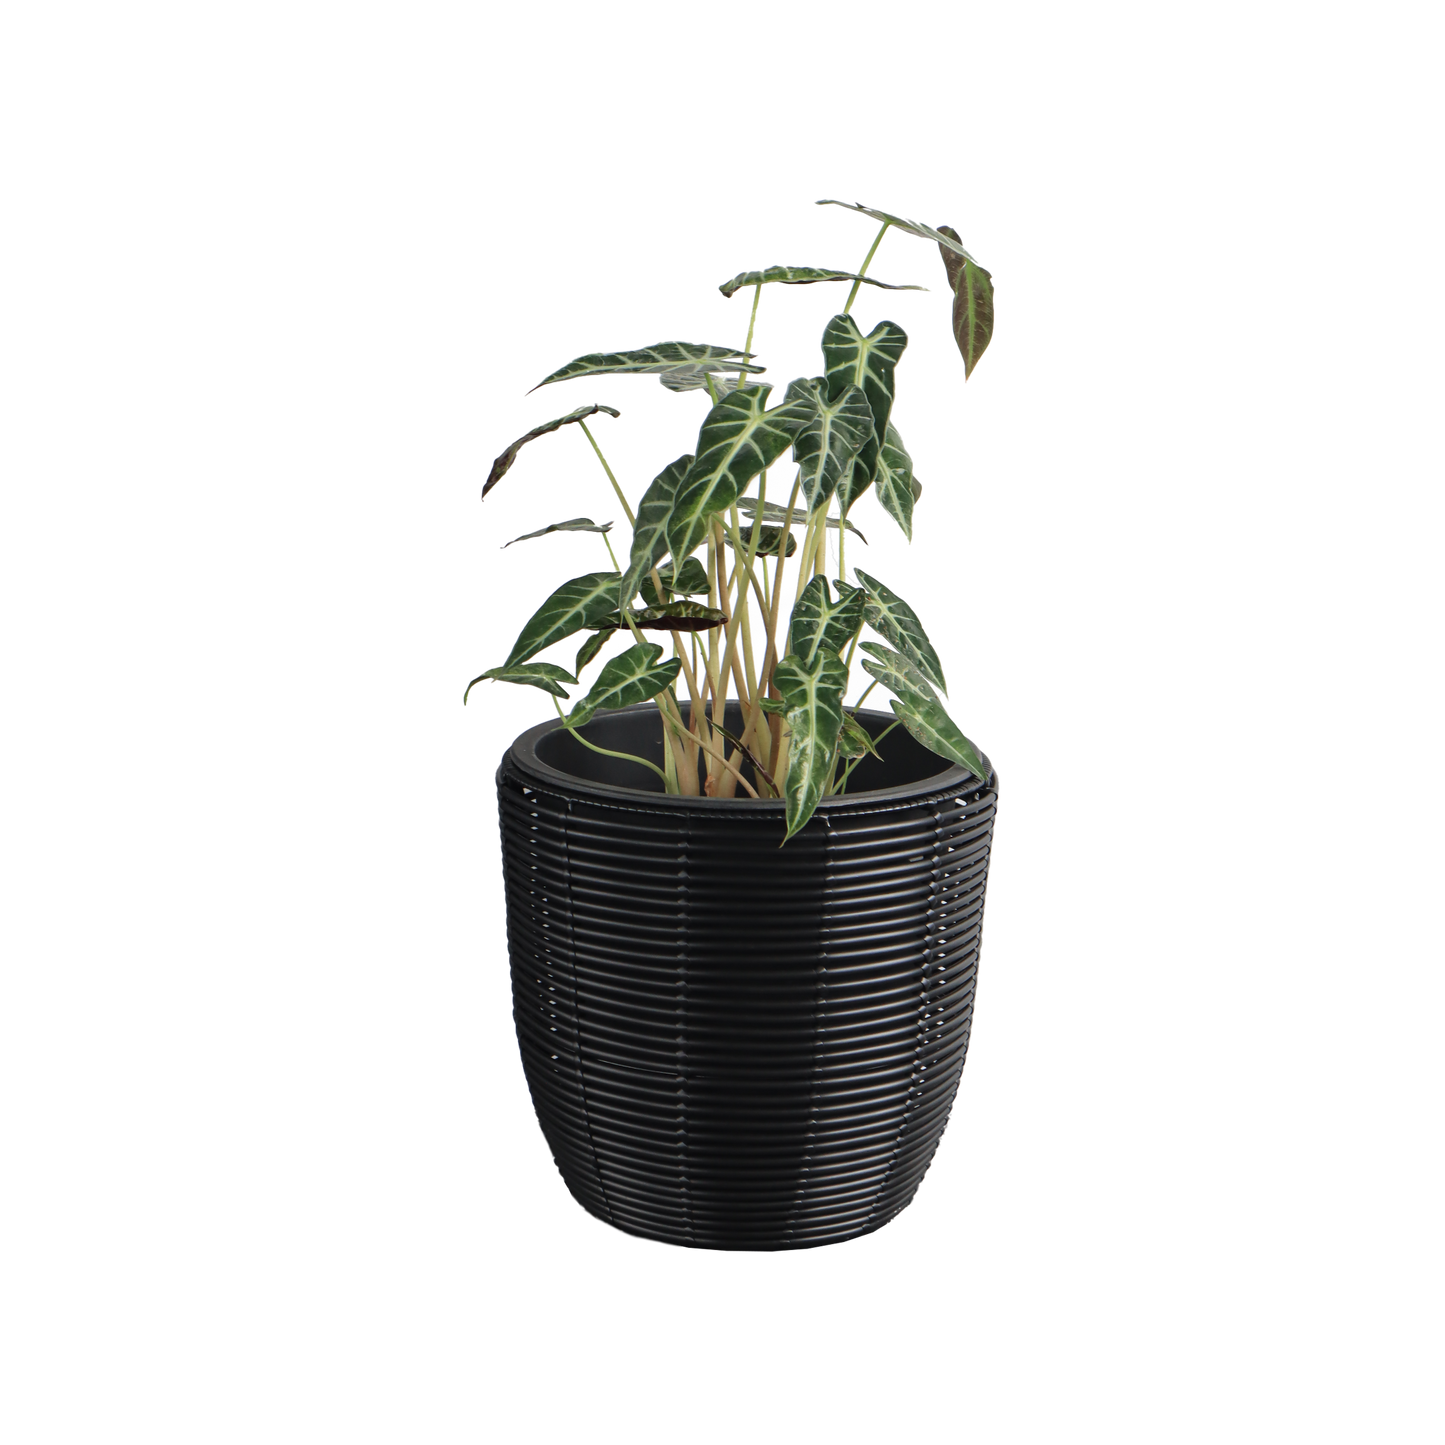 Eden Grace Set of 3 Hand Woven Round Wicker Planters - Made with Eco-Friendly Resin - Comes with Polyethylene Pot inside